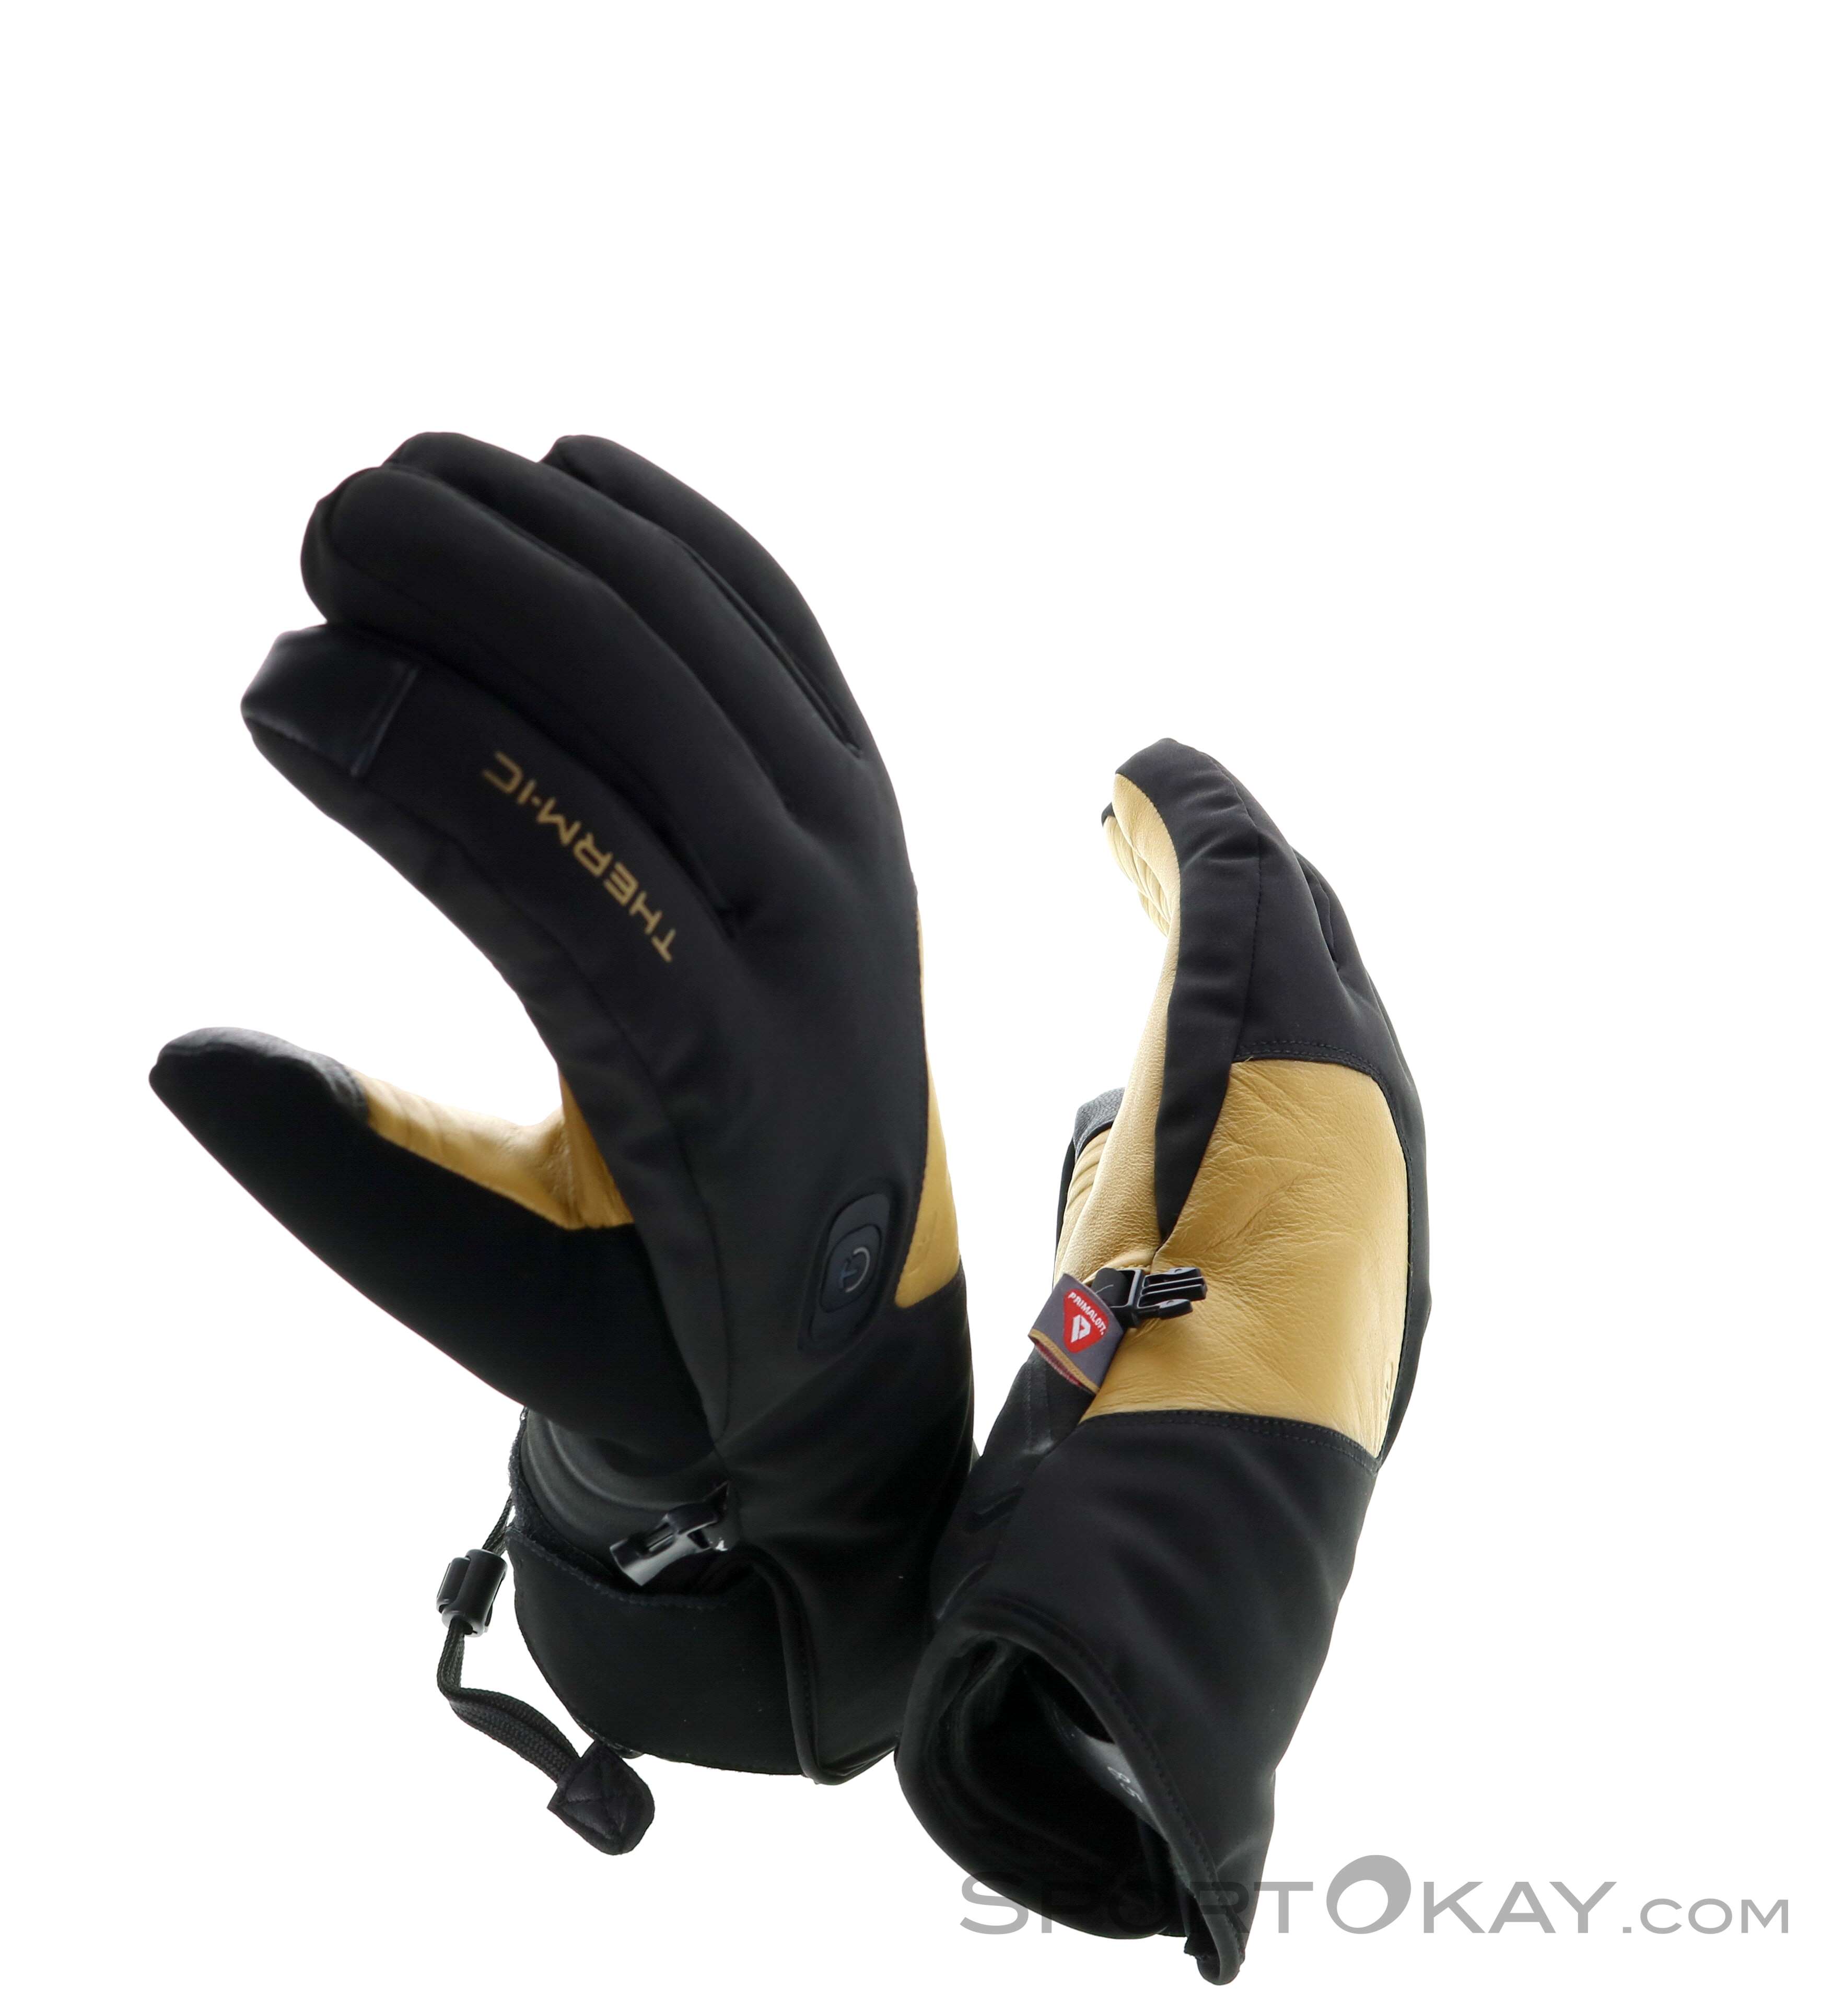 ACTIV LIGHT TECH GLOVES THERM-IC